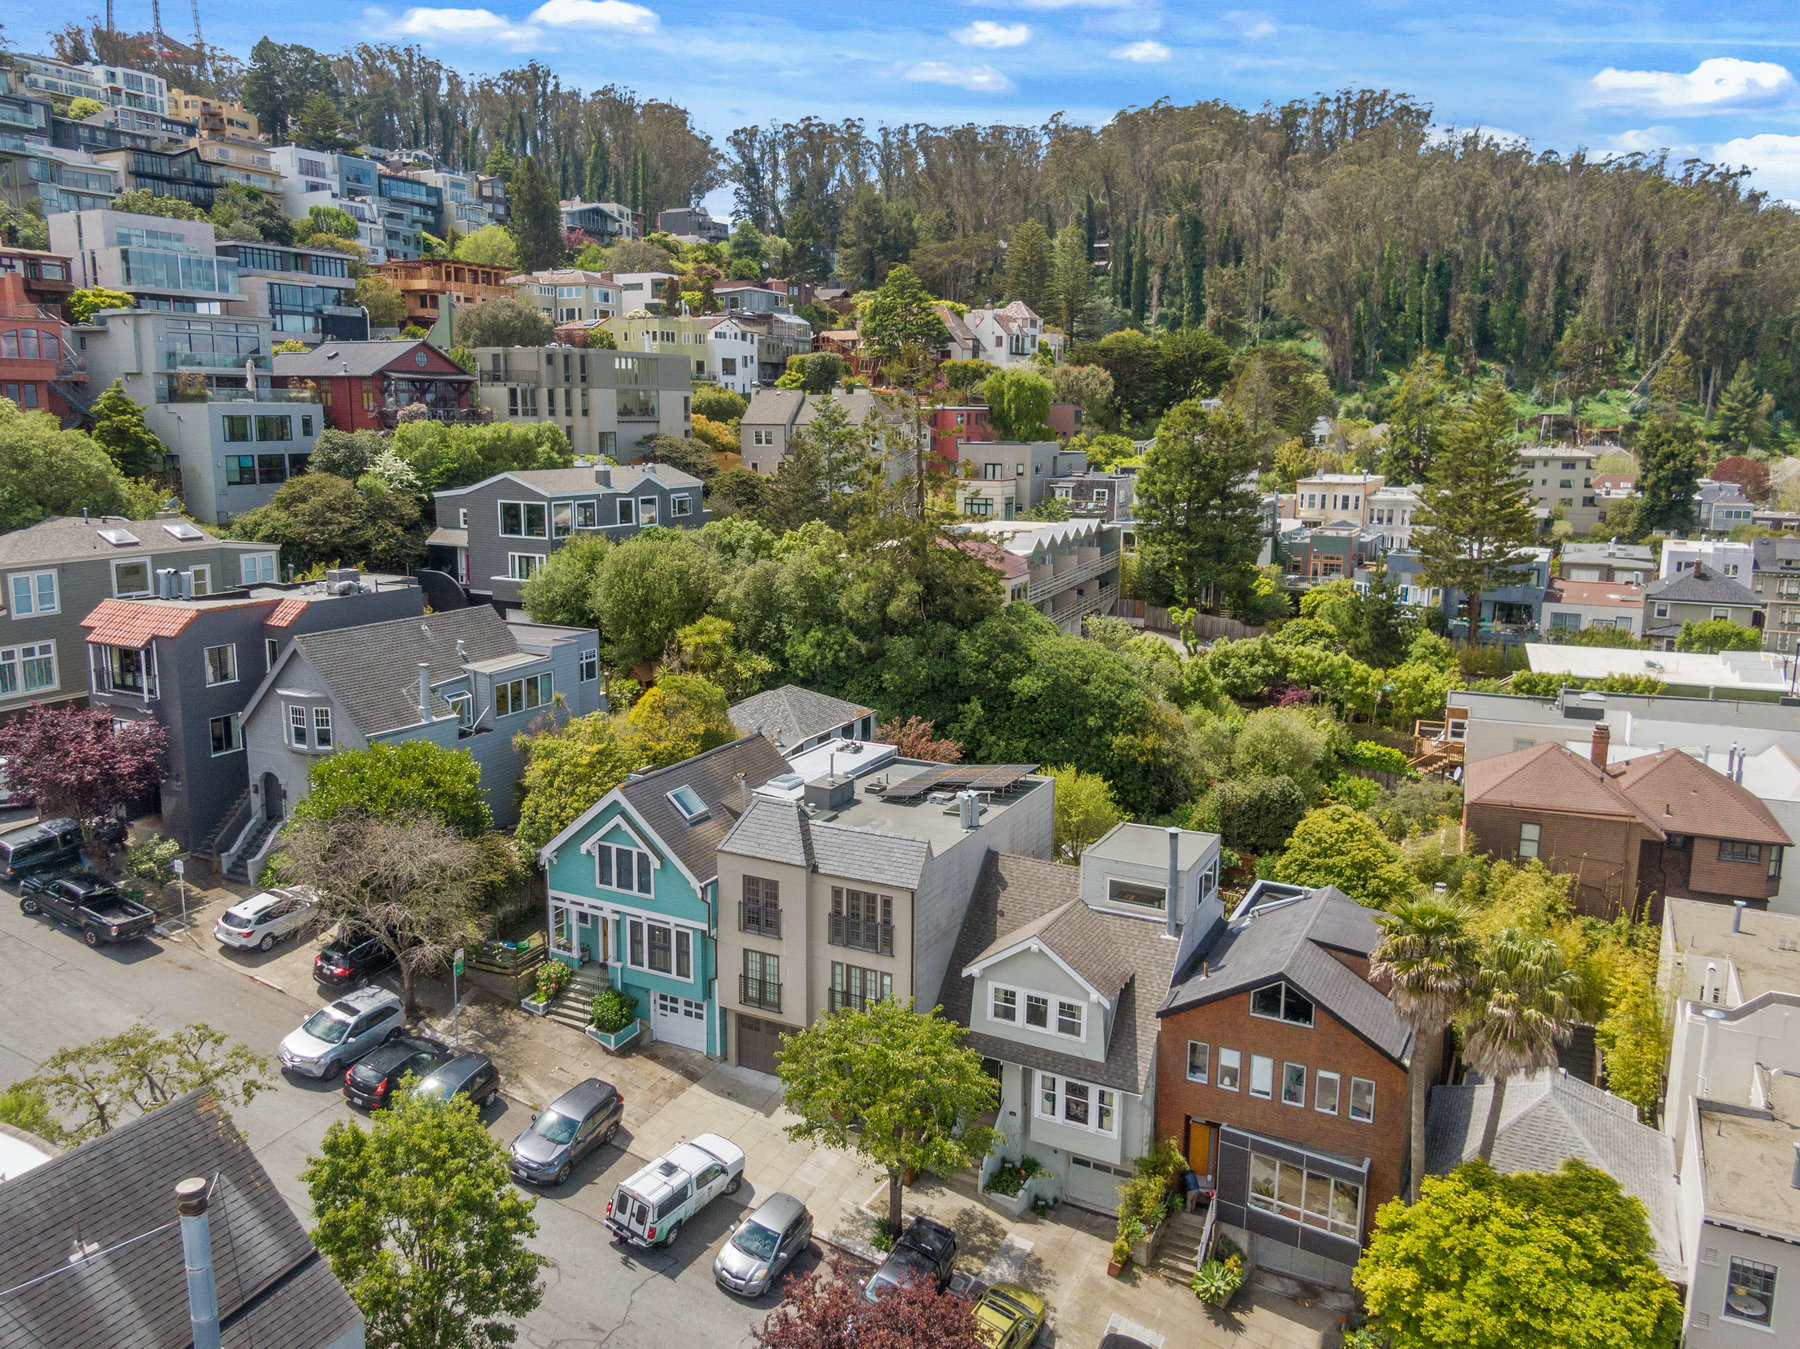 Property Photo: Aerial photo of 1523 Cole Street showing the surrounding homes on the hill.